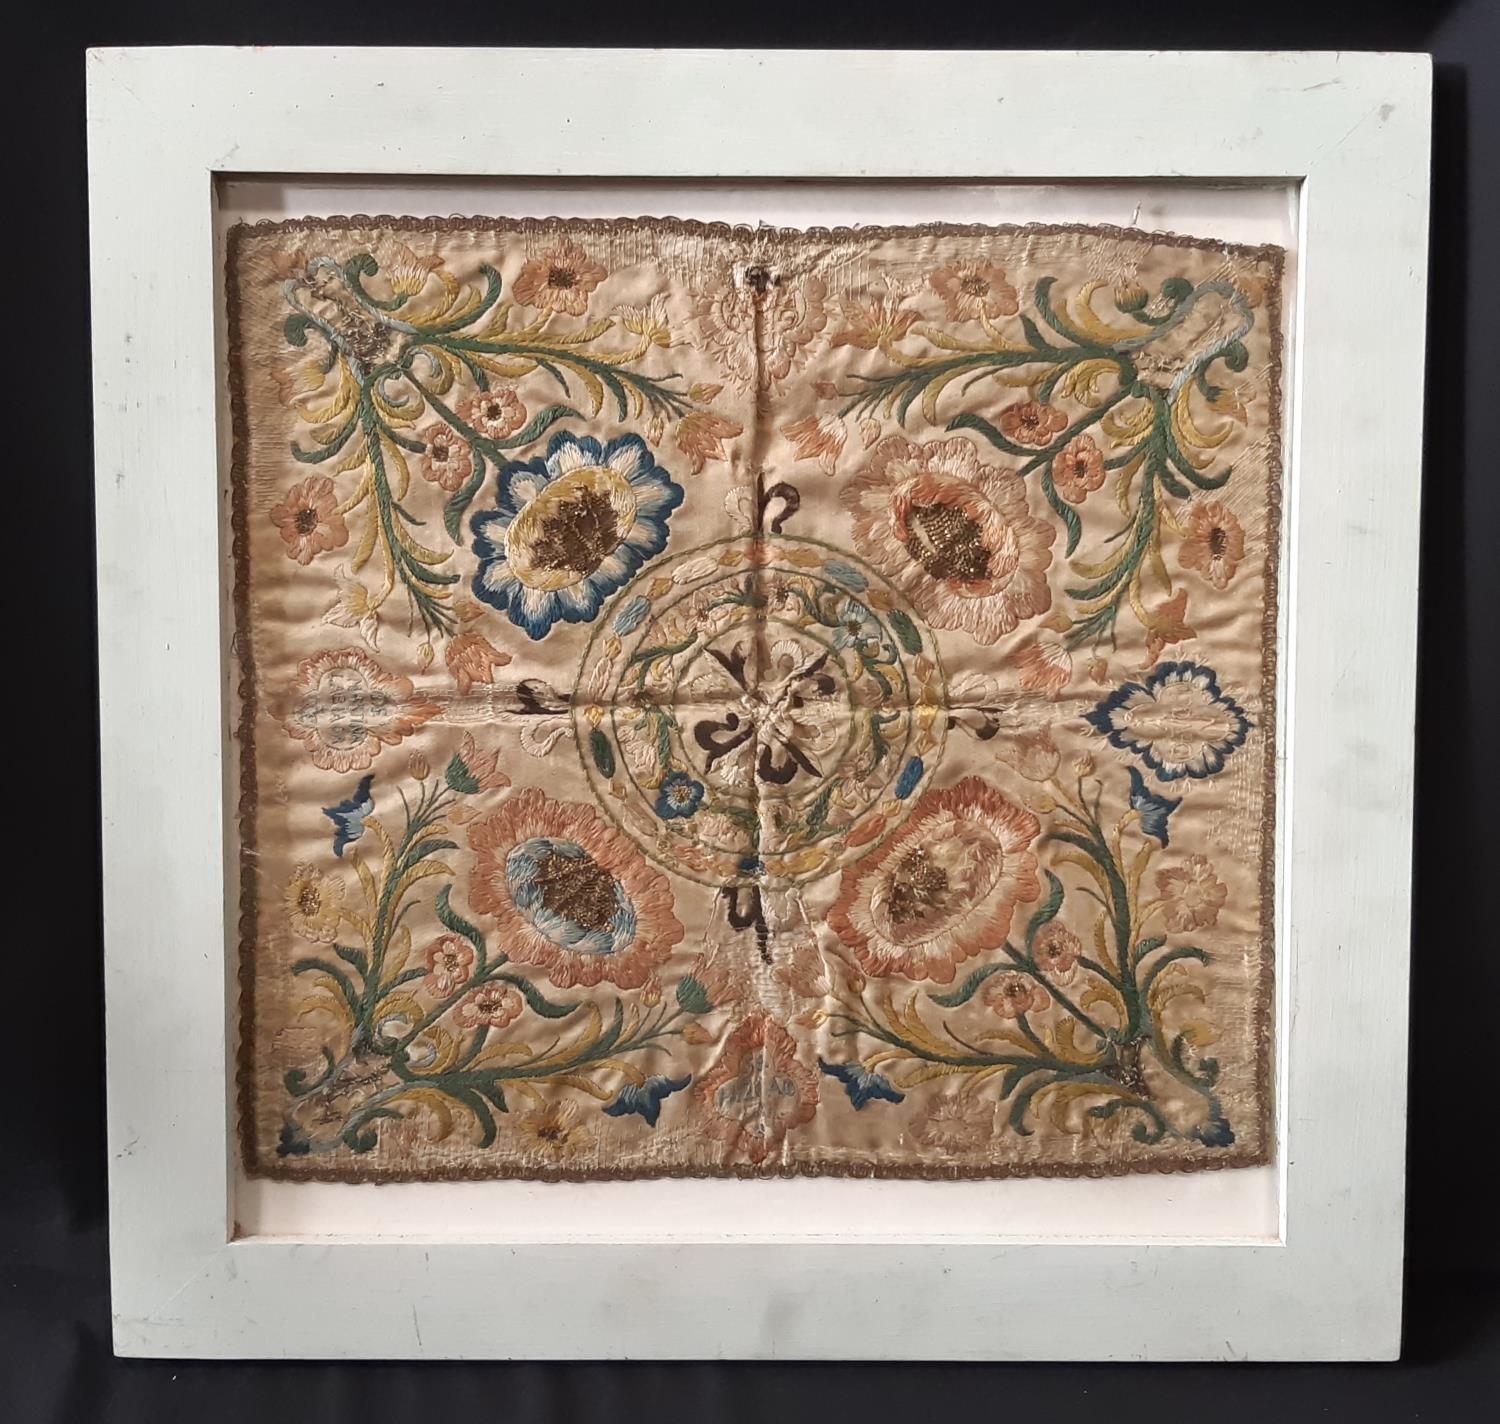 18th century Spanish embroidered silk panel with a floral design in satin stich arranged in